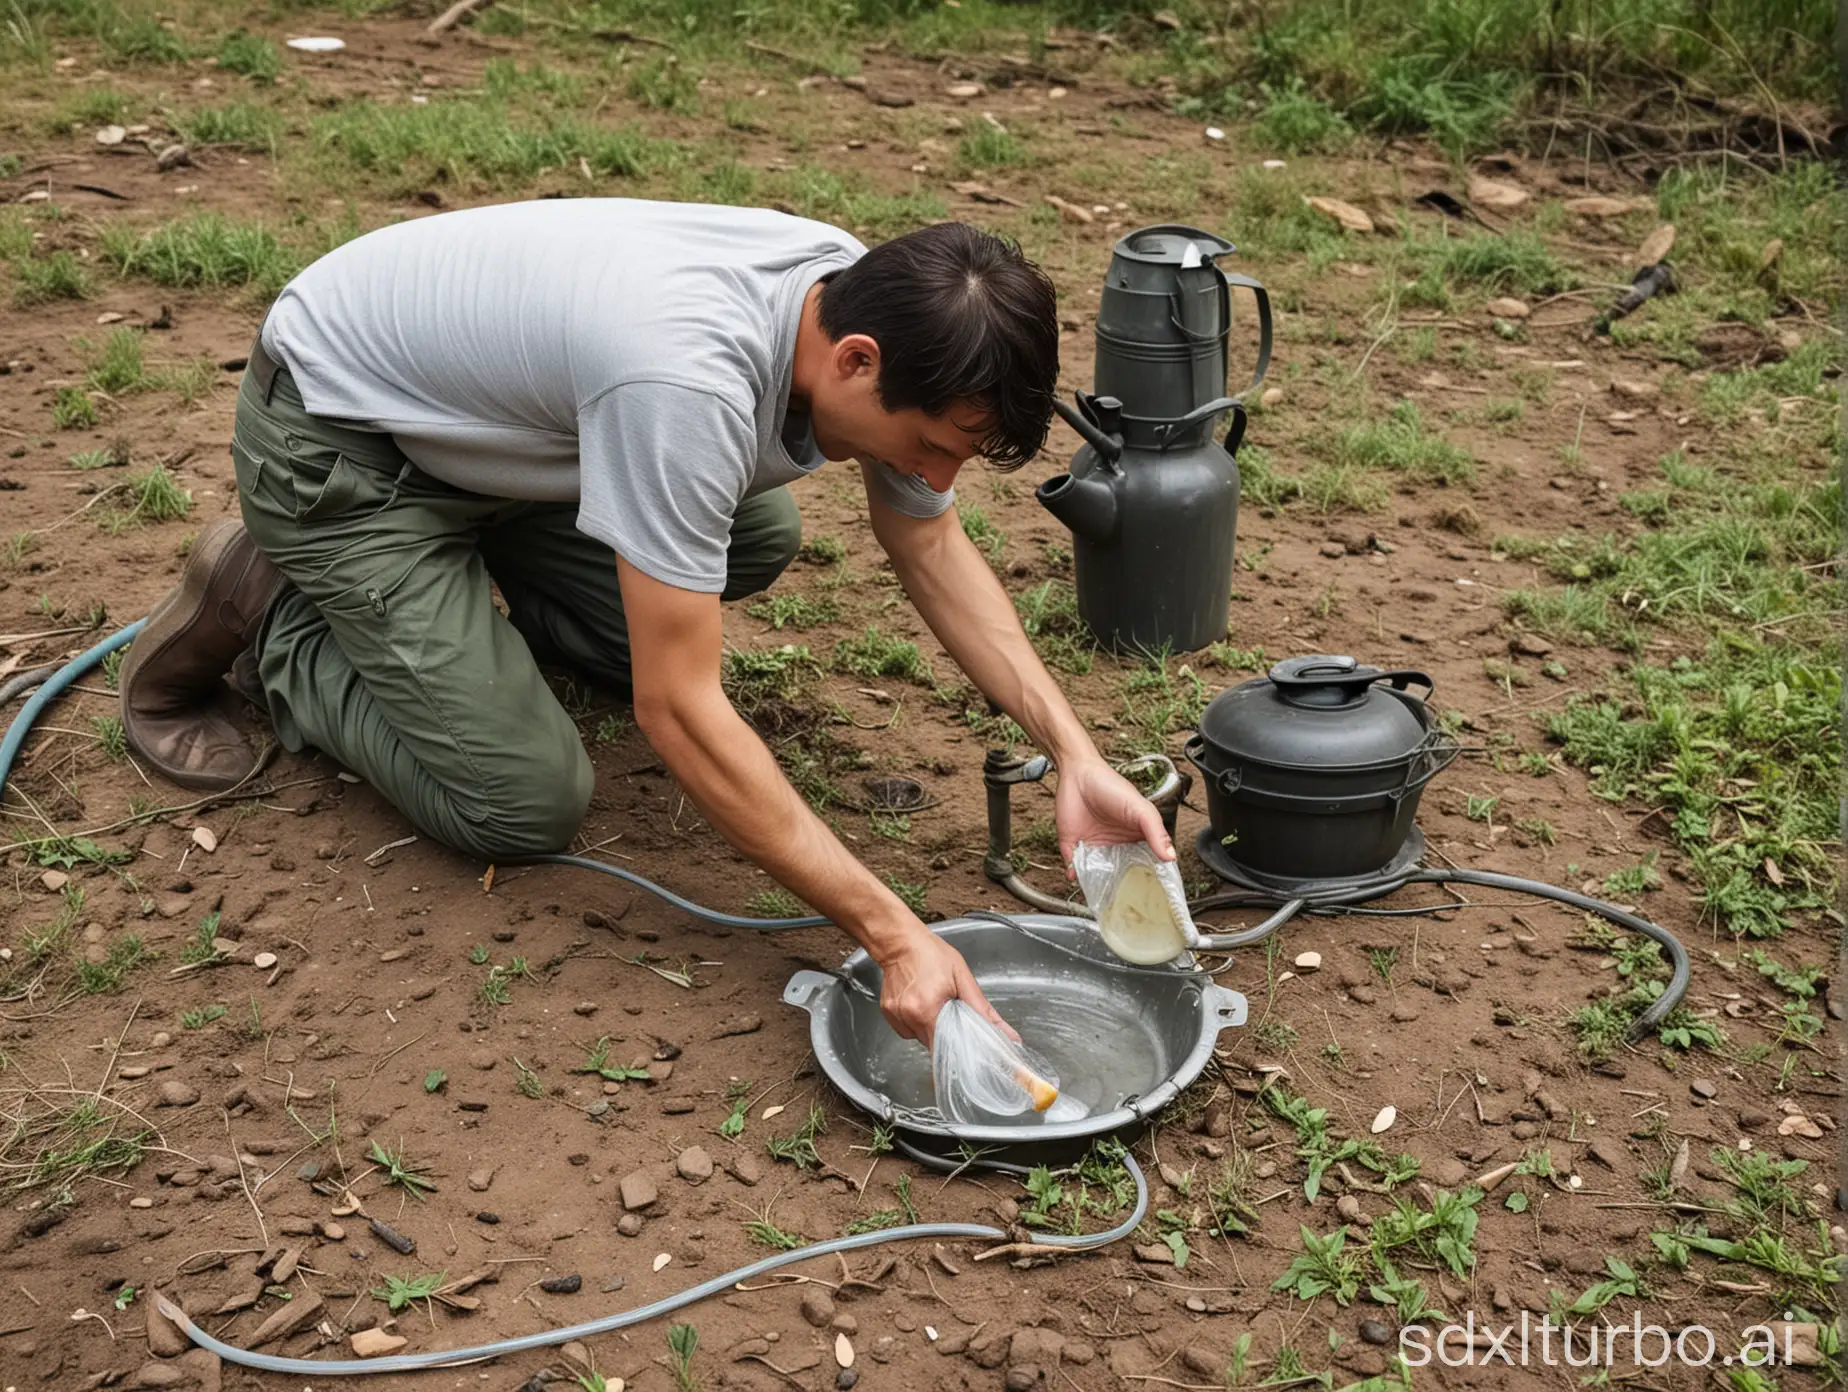 After the man finished eating, he washed the tableware with a hose in the wild.